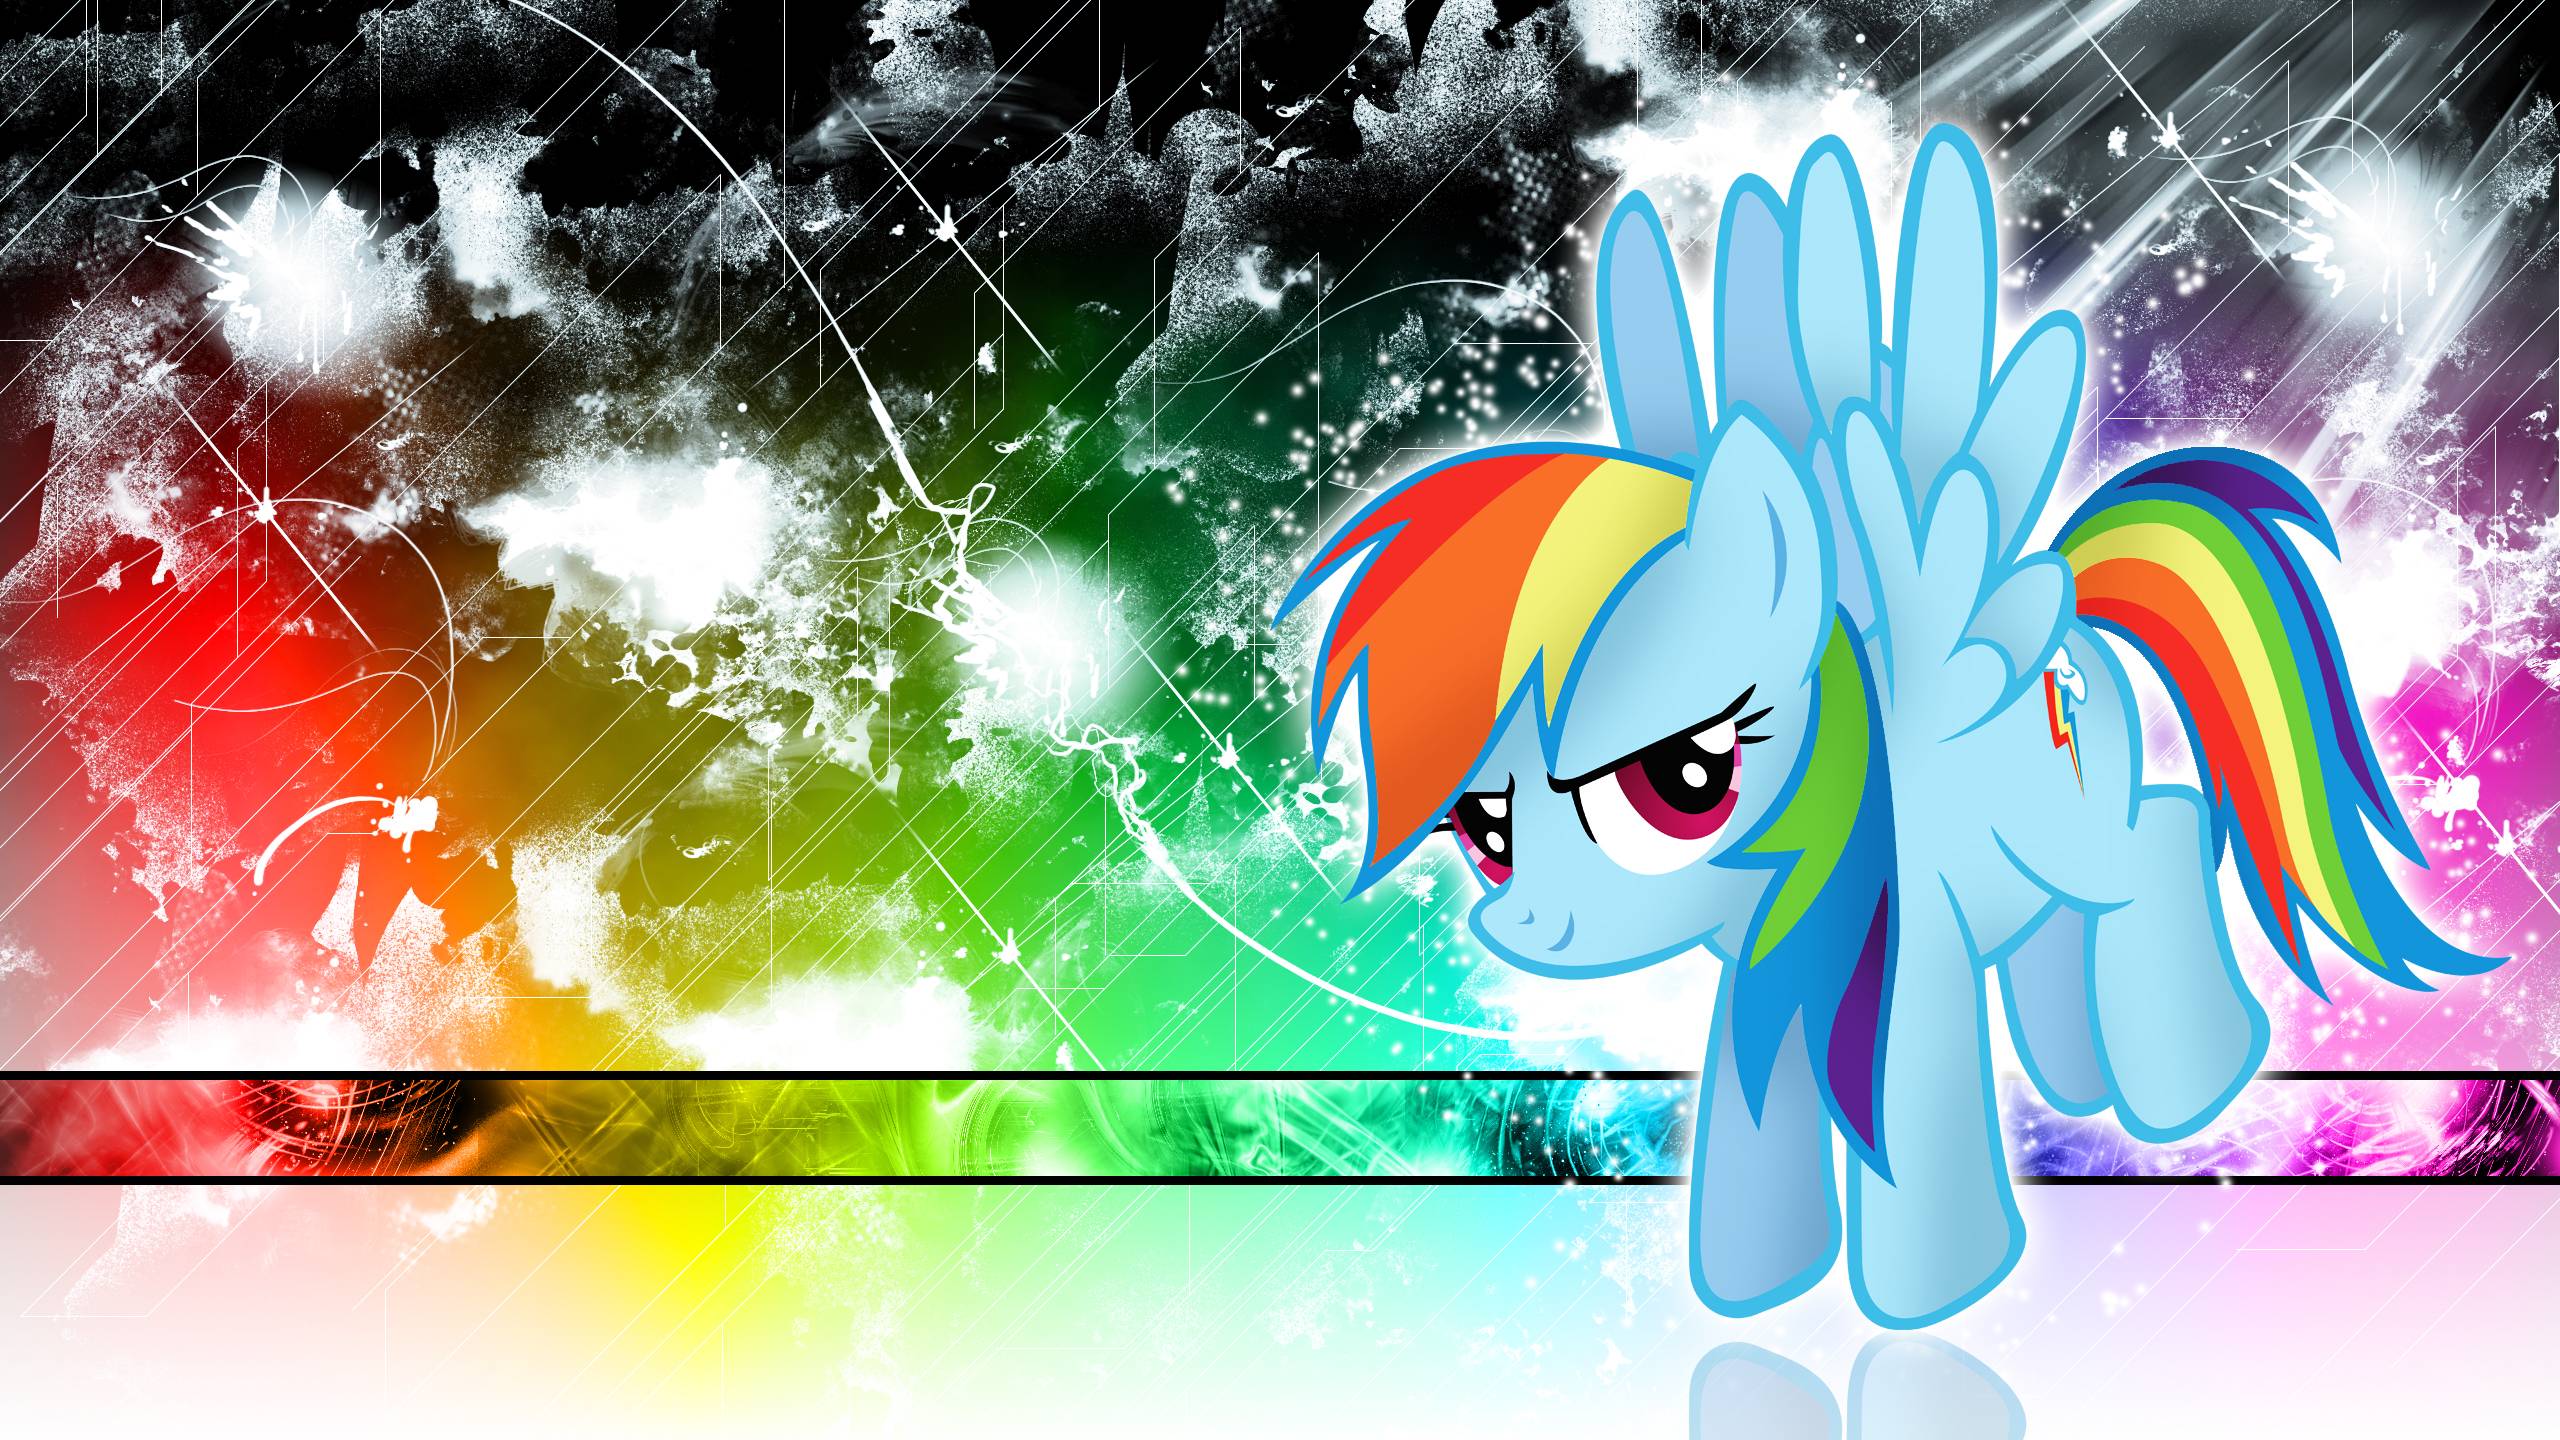 Rainbow Dash Wallpapers Top Free Rainbow Dash Backgrounds Images, Photos, Reviews